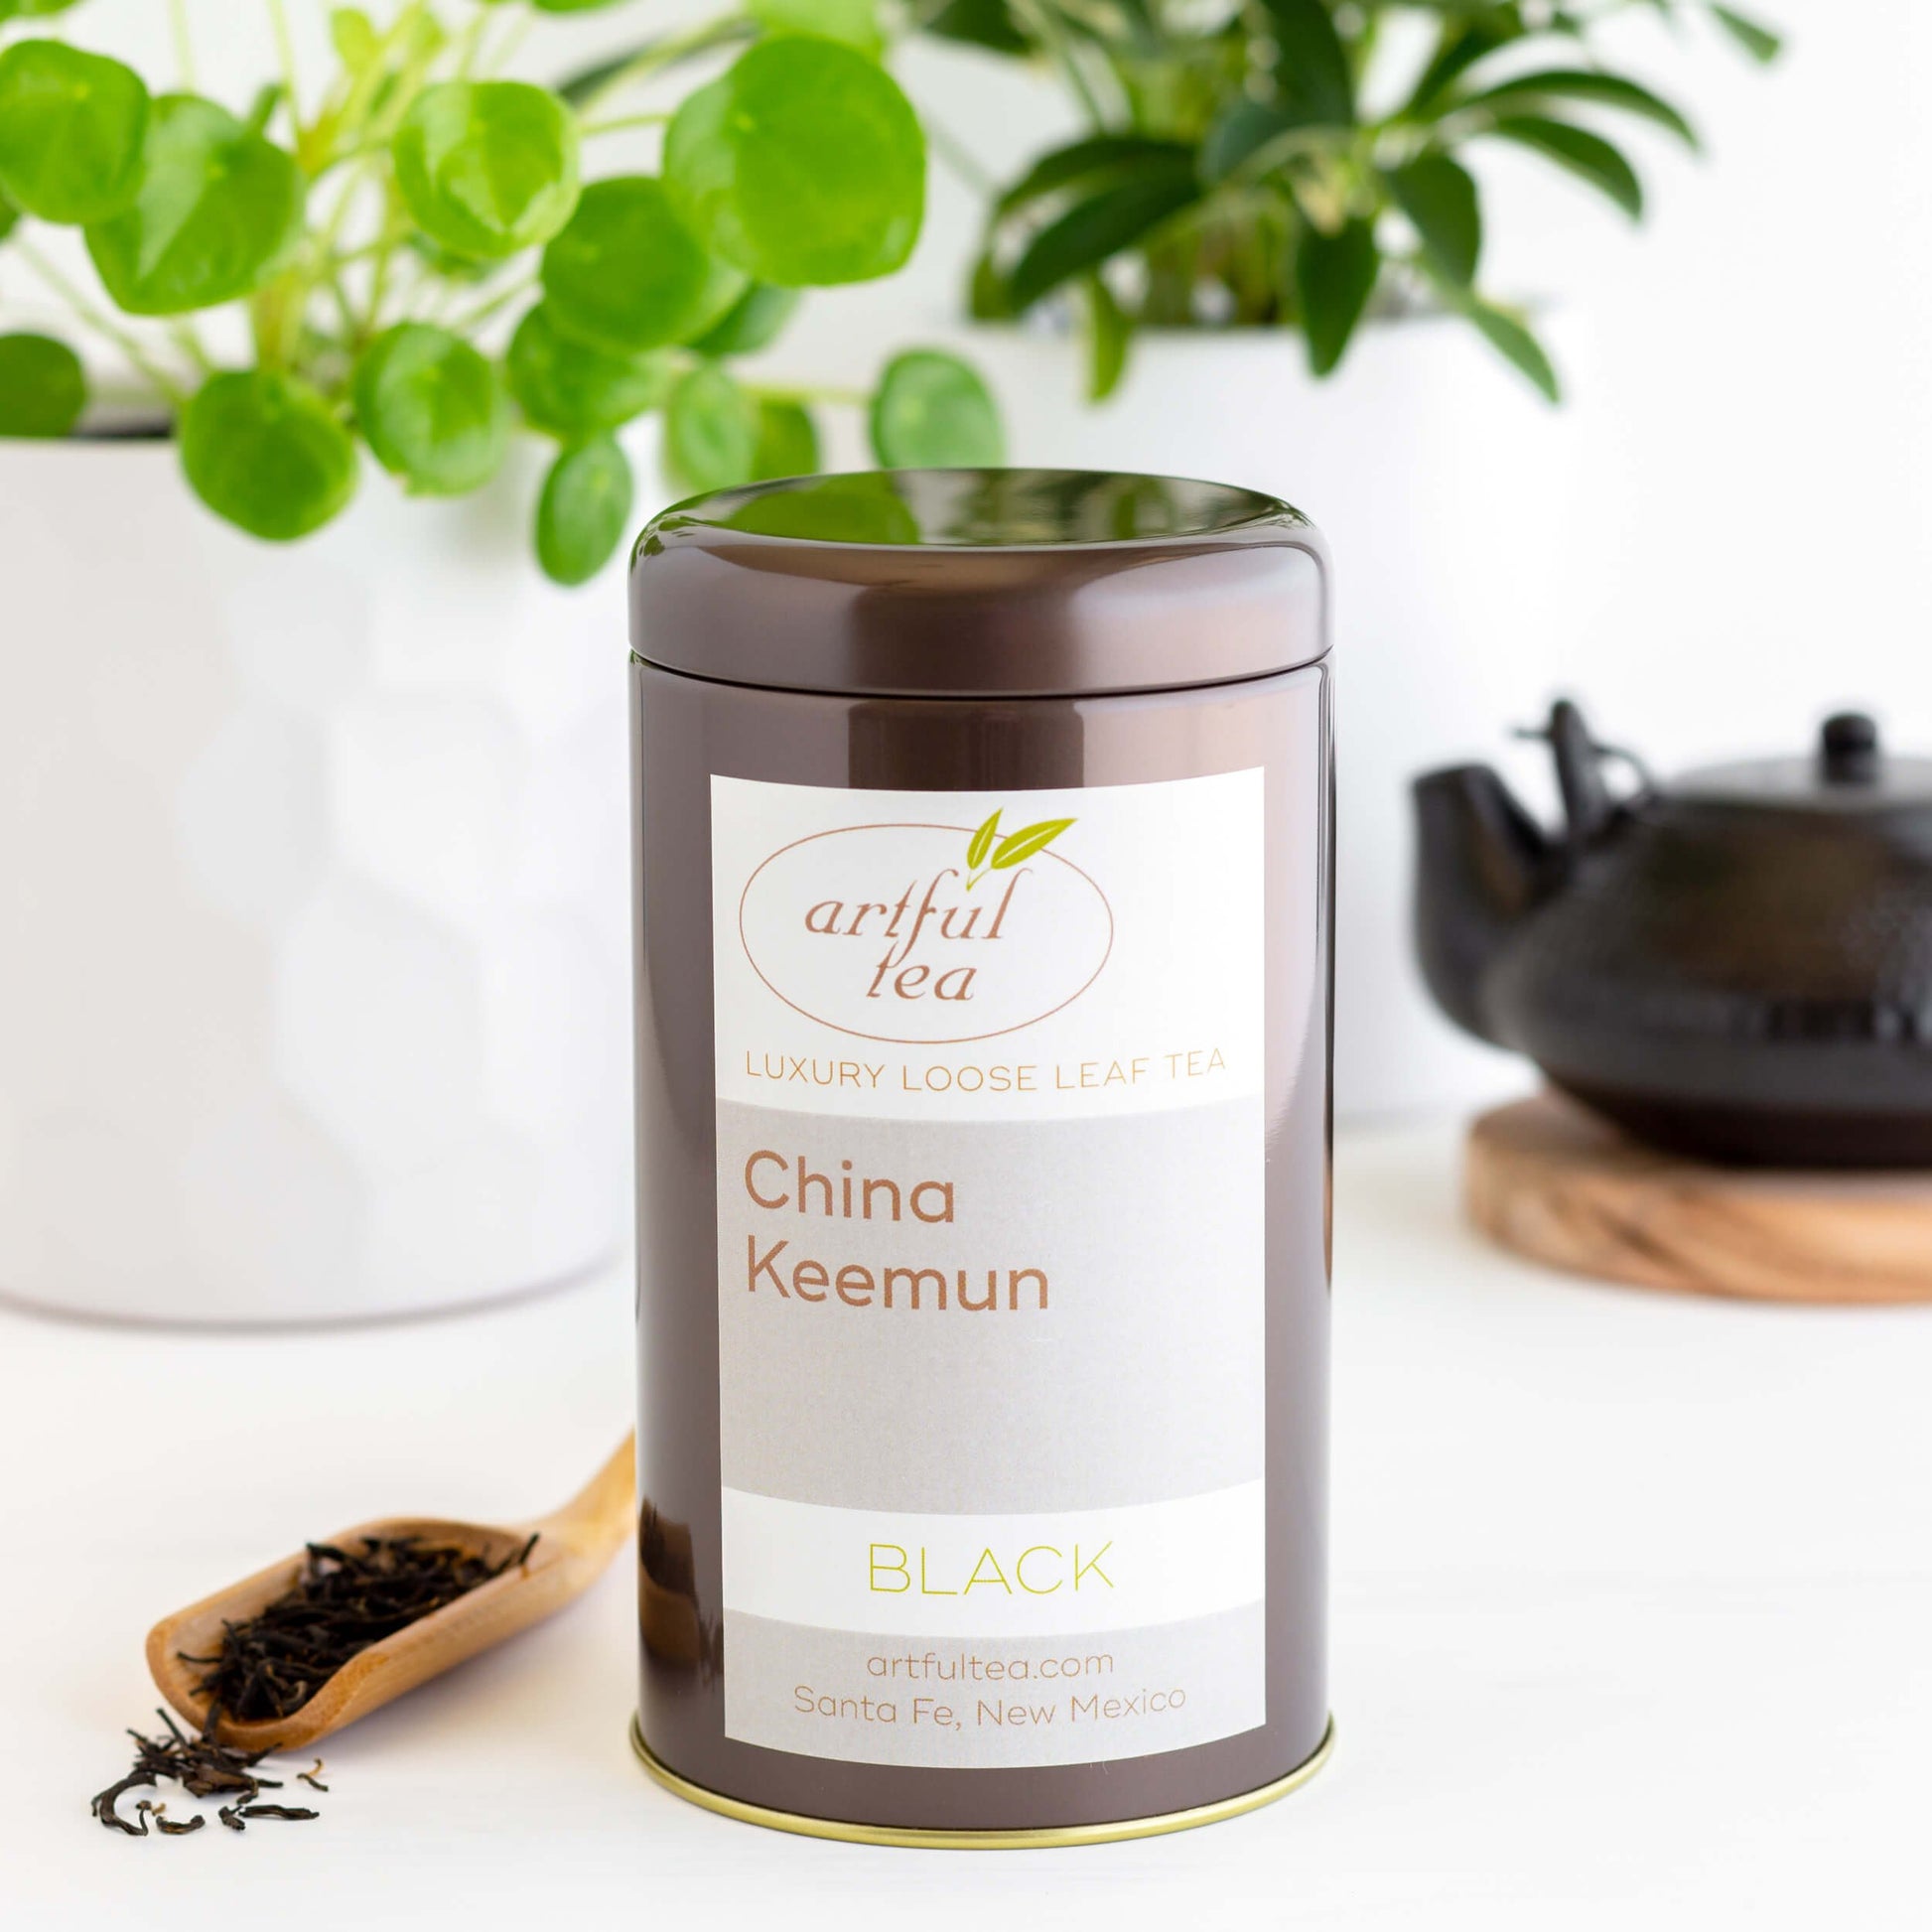 China Keemun Black Tea shown packaged in a brown tin, with black teapot and green plant in the background, and wooden scoop of loose tea in foreground